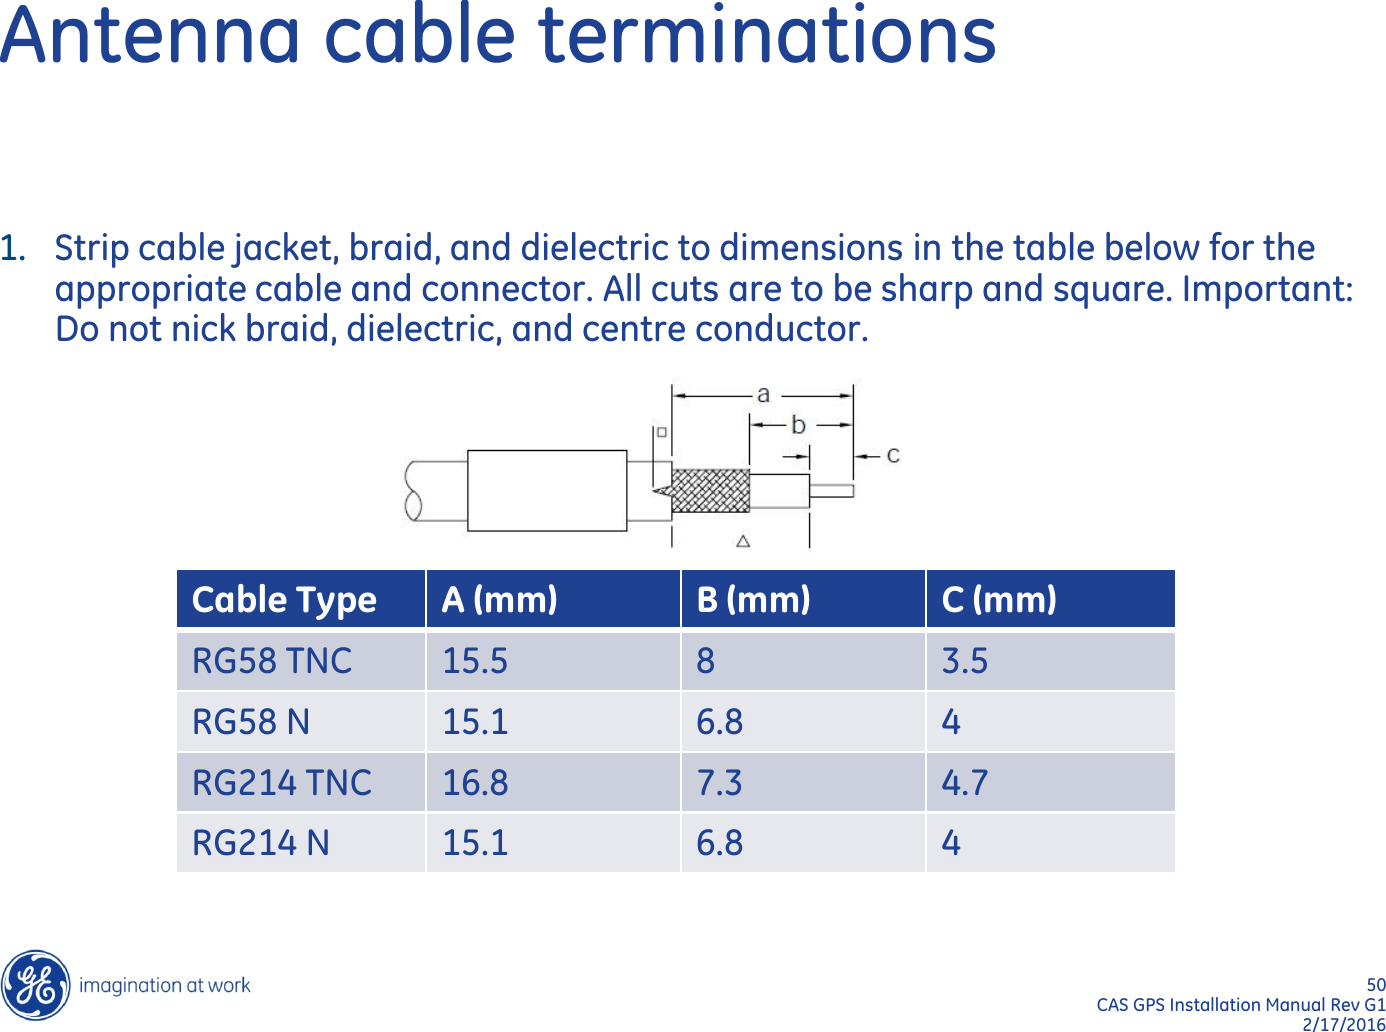 50  CAS GPS Installation Manual Rev G1 2/17/2016 Antenna cable terminations 1. Strip cable jacket, braid, and dielectric to dimensions in the table below for the appropriate cable and connector. All cuts are to be sharp and square. Important: Do not nick braid, dielectric, and centre conductor.           Cable Type A (mm) B (mm) C (mm) RG58 TNC 15.5  8  3.5 RG58 N  15.1 6.8  4 RG214 TNC 16.8 7.3 4.7 RG214 N 15.1 6.8  4 